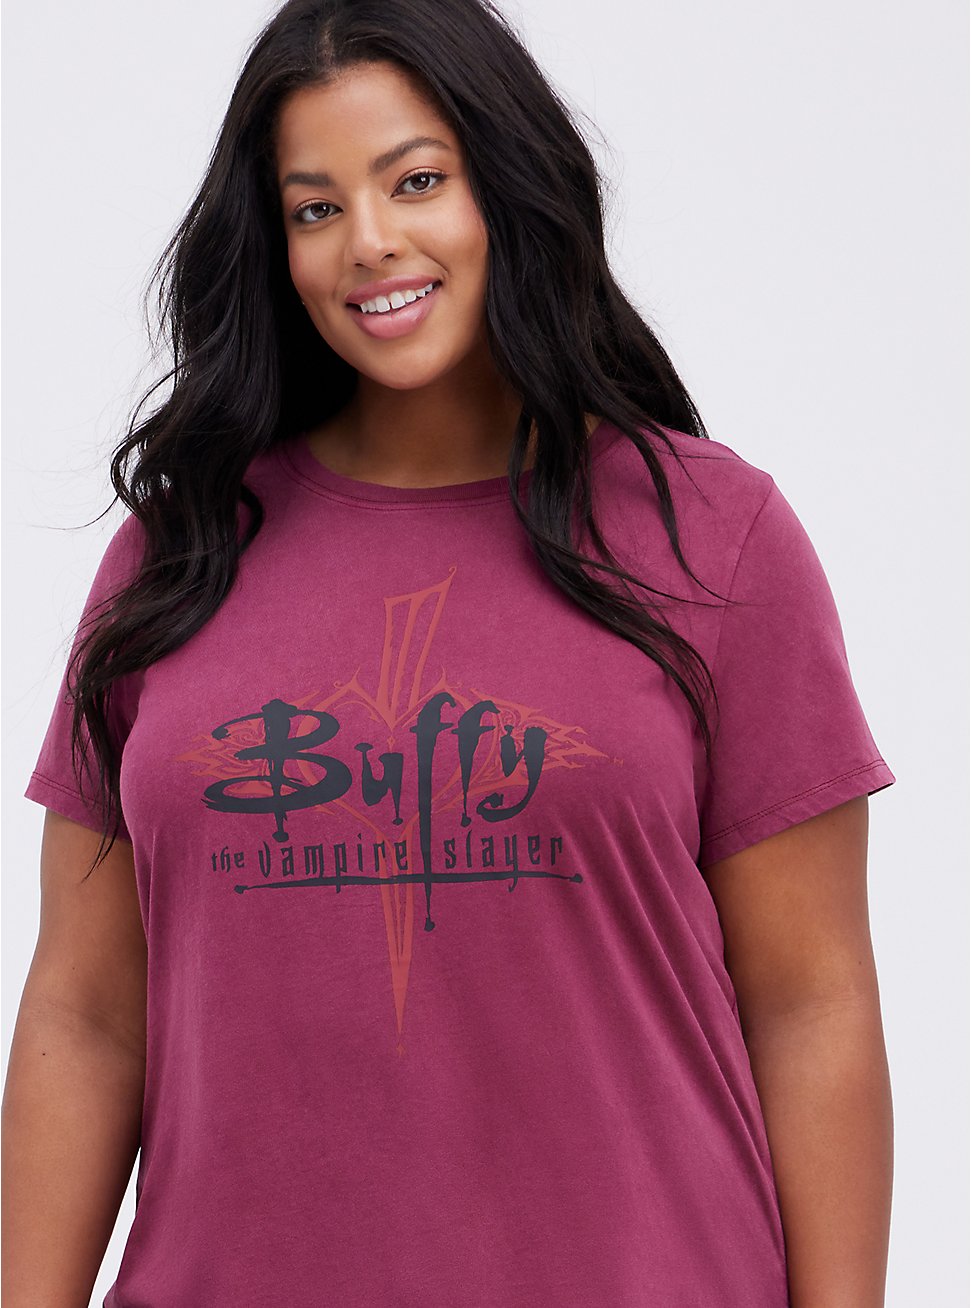 Classic Fit Crew Tee - Buffy Red Wash, RED, hi-res